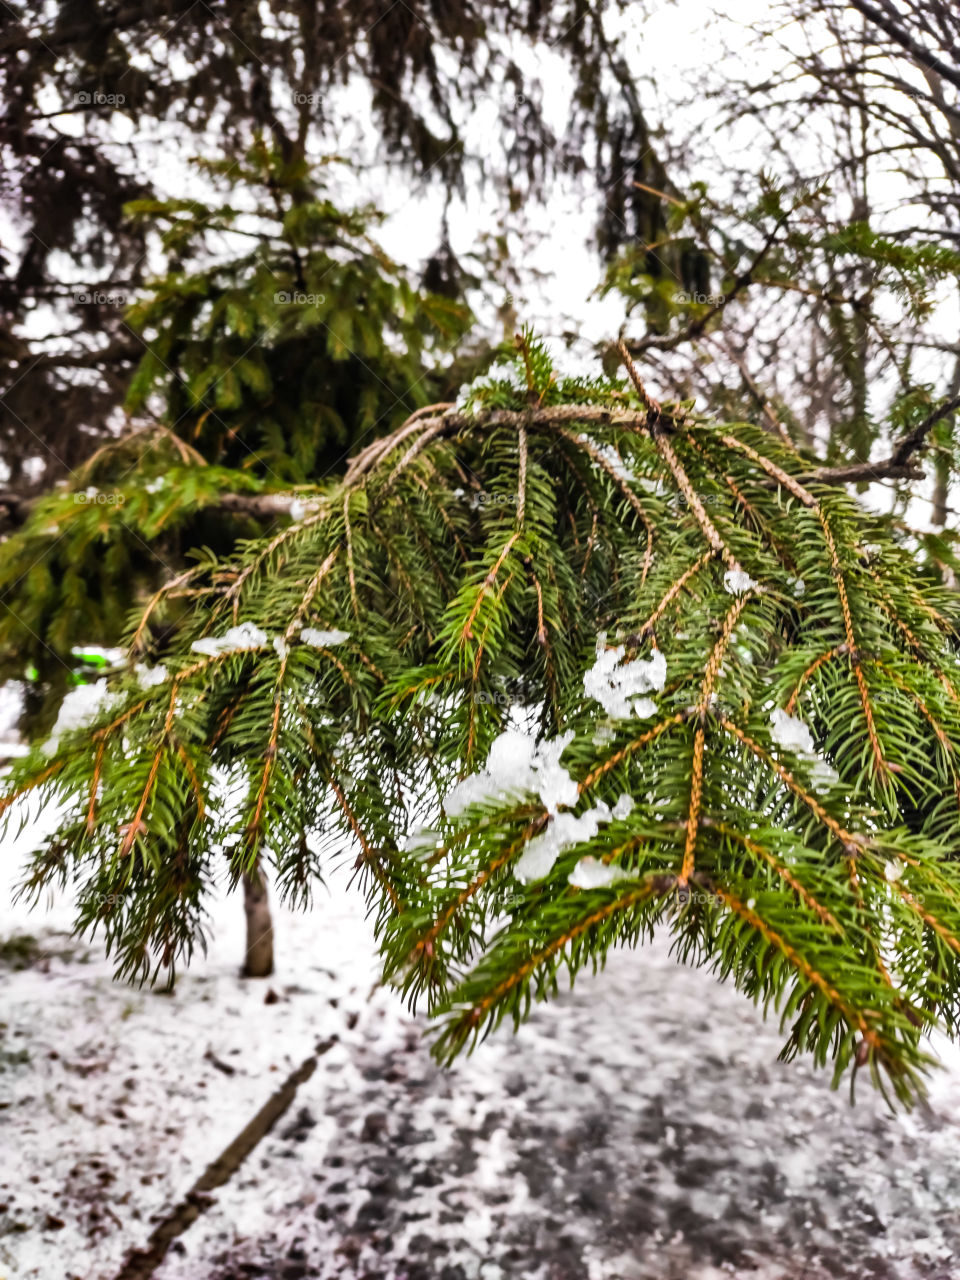 Snow on a conifer with a blurred background.